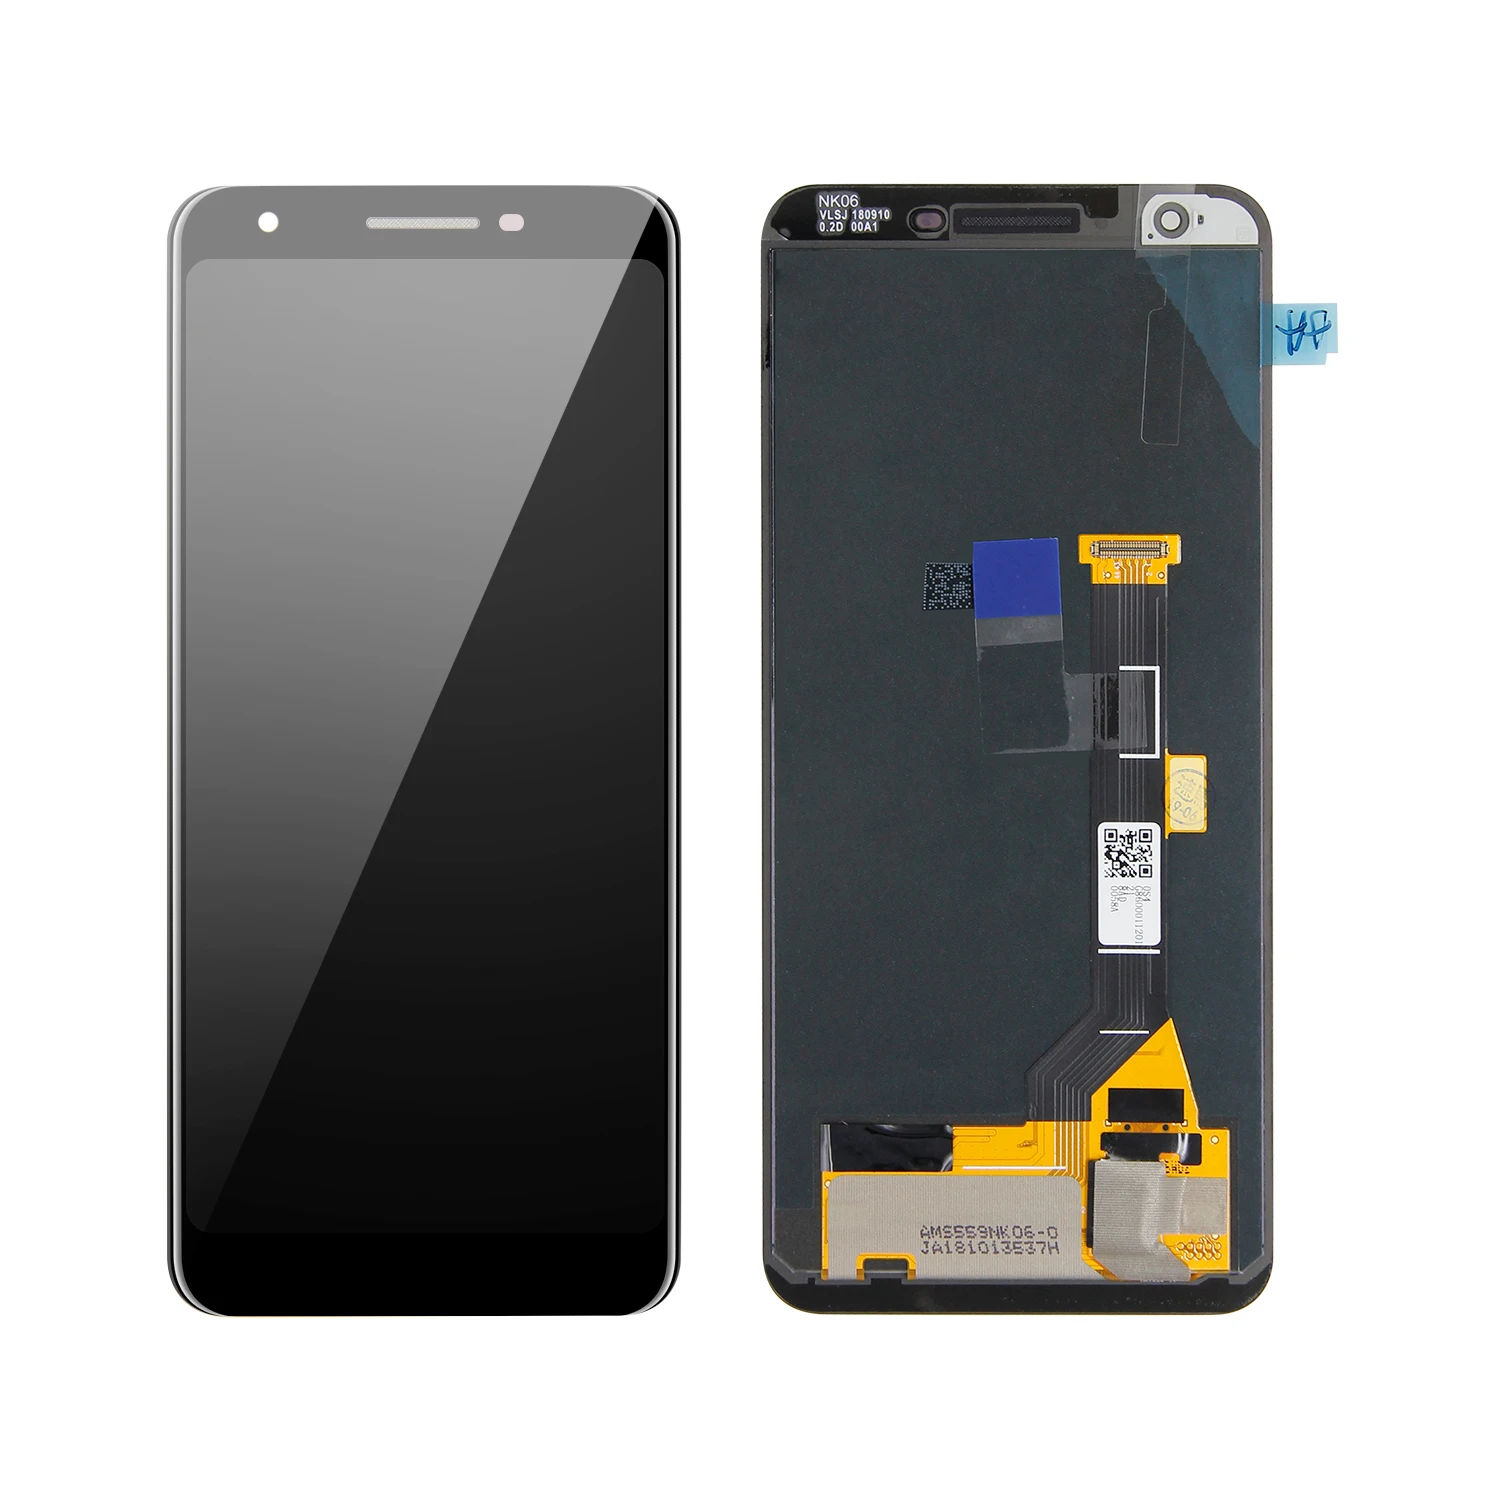 

Original Amoled For Google Pixel 3A XL LCD Display Touch Screen Digitizer Assembly G020C G020G G020F Pixel 3AXL OLED Screen Tool